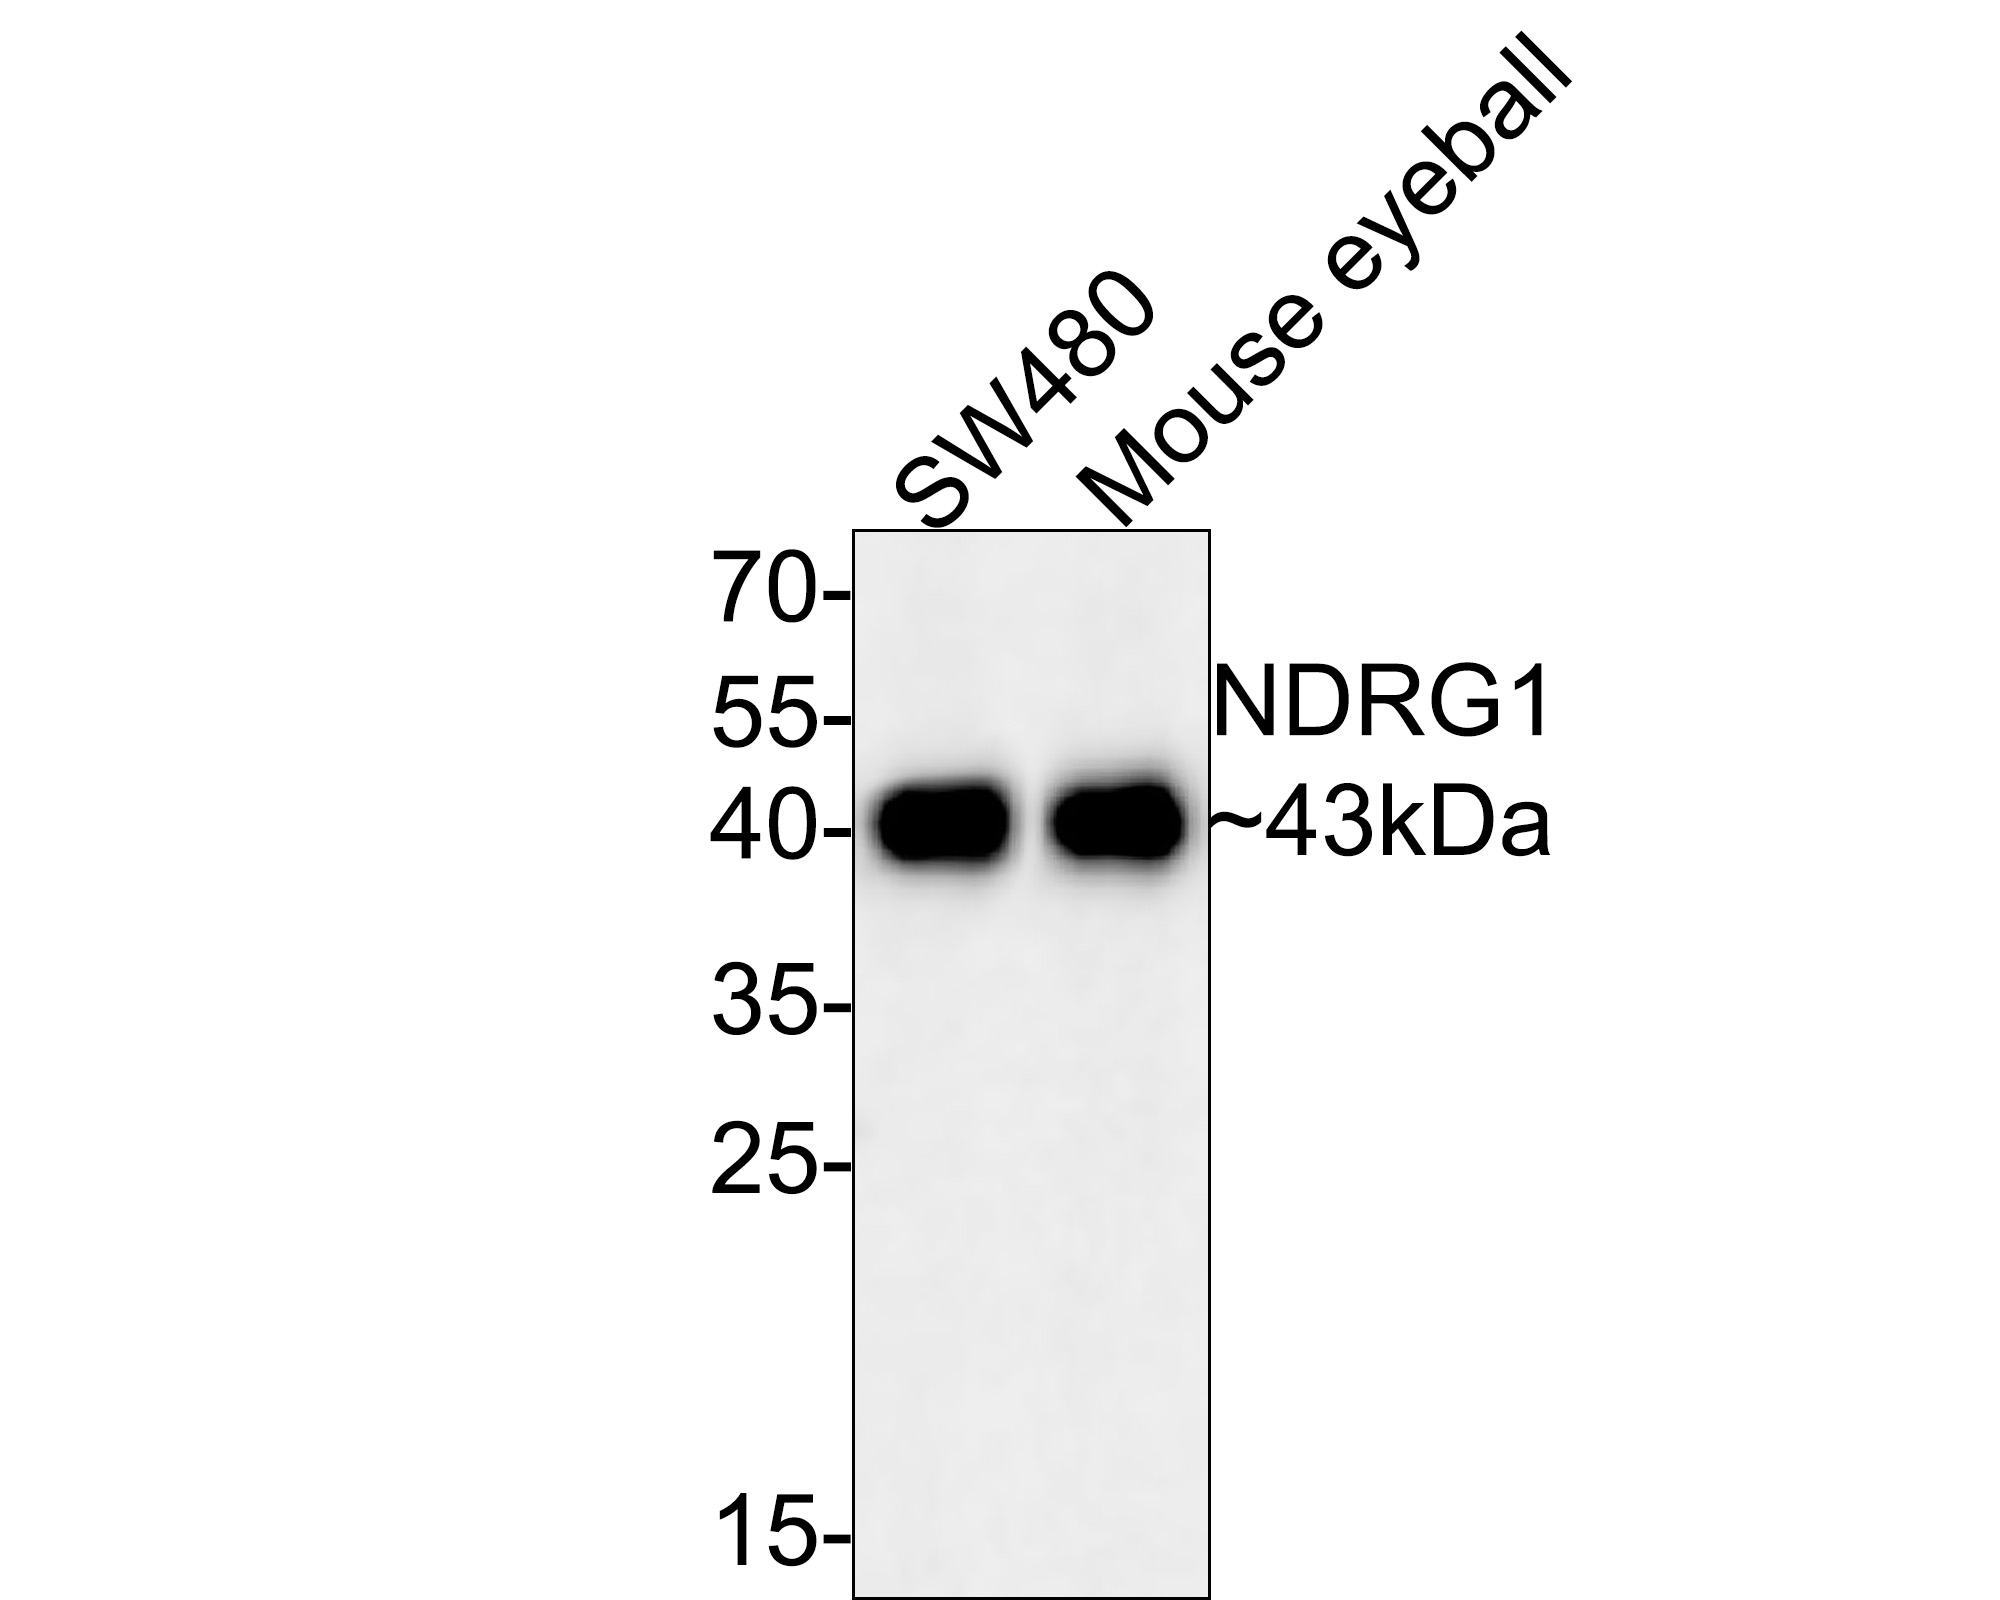 Western blot analysis of NDRG1 on different lysates with Rabbit anti-NDRG1 antibody (ET1705-20) at 1/500 dilution.<br />
<br />
Lane 1: SW480 cell lysate (10 µg/Lane)<br />
Lane 2: Mouse eyeball tissue lysate (20 µg/Lane)<br />
<br />
Predicted band size: 43 kDa<br />
Observed band size: 43 kDa<br />
<br />
Exposure time: 33 seconds;<br />
<br />
12% SDS-PAGE gel.<br />
<br />
Proteins were transferred to a PVDF membrane and blocked with 5% NFDM/TBST for 1 hour at room temperature. The primary antibody (ET1705-20) at 1/500 dilution was used in 5% NFDM/TBST at room temperature for 2 hours. Goat Anti-Rabbit IgG - HRP Secondary Antibody (HA1001) at 1:300,000 dilution was used for 1 hour at room temperature.